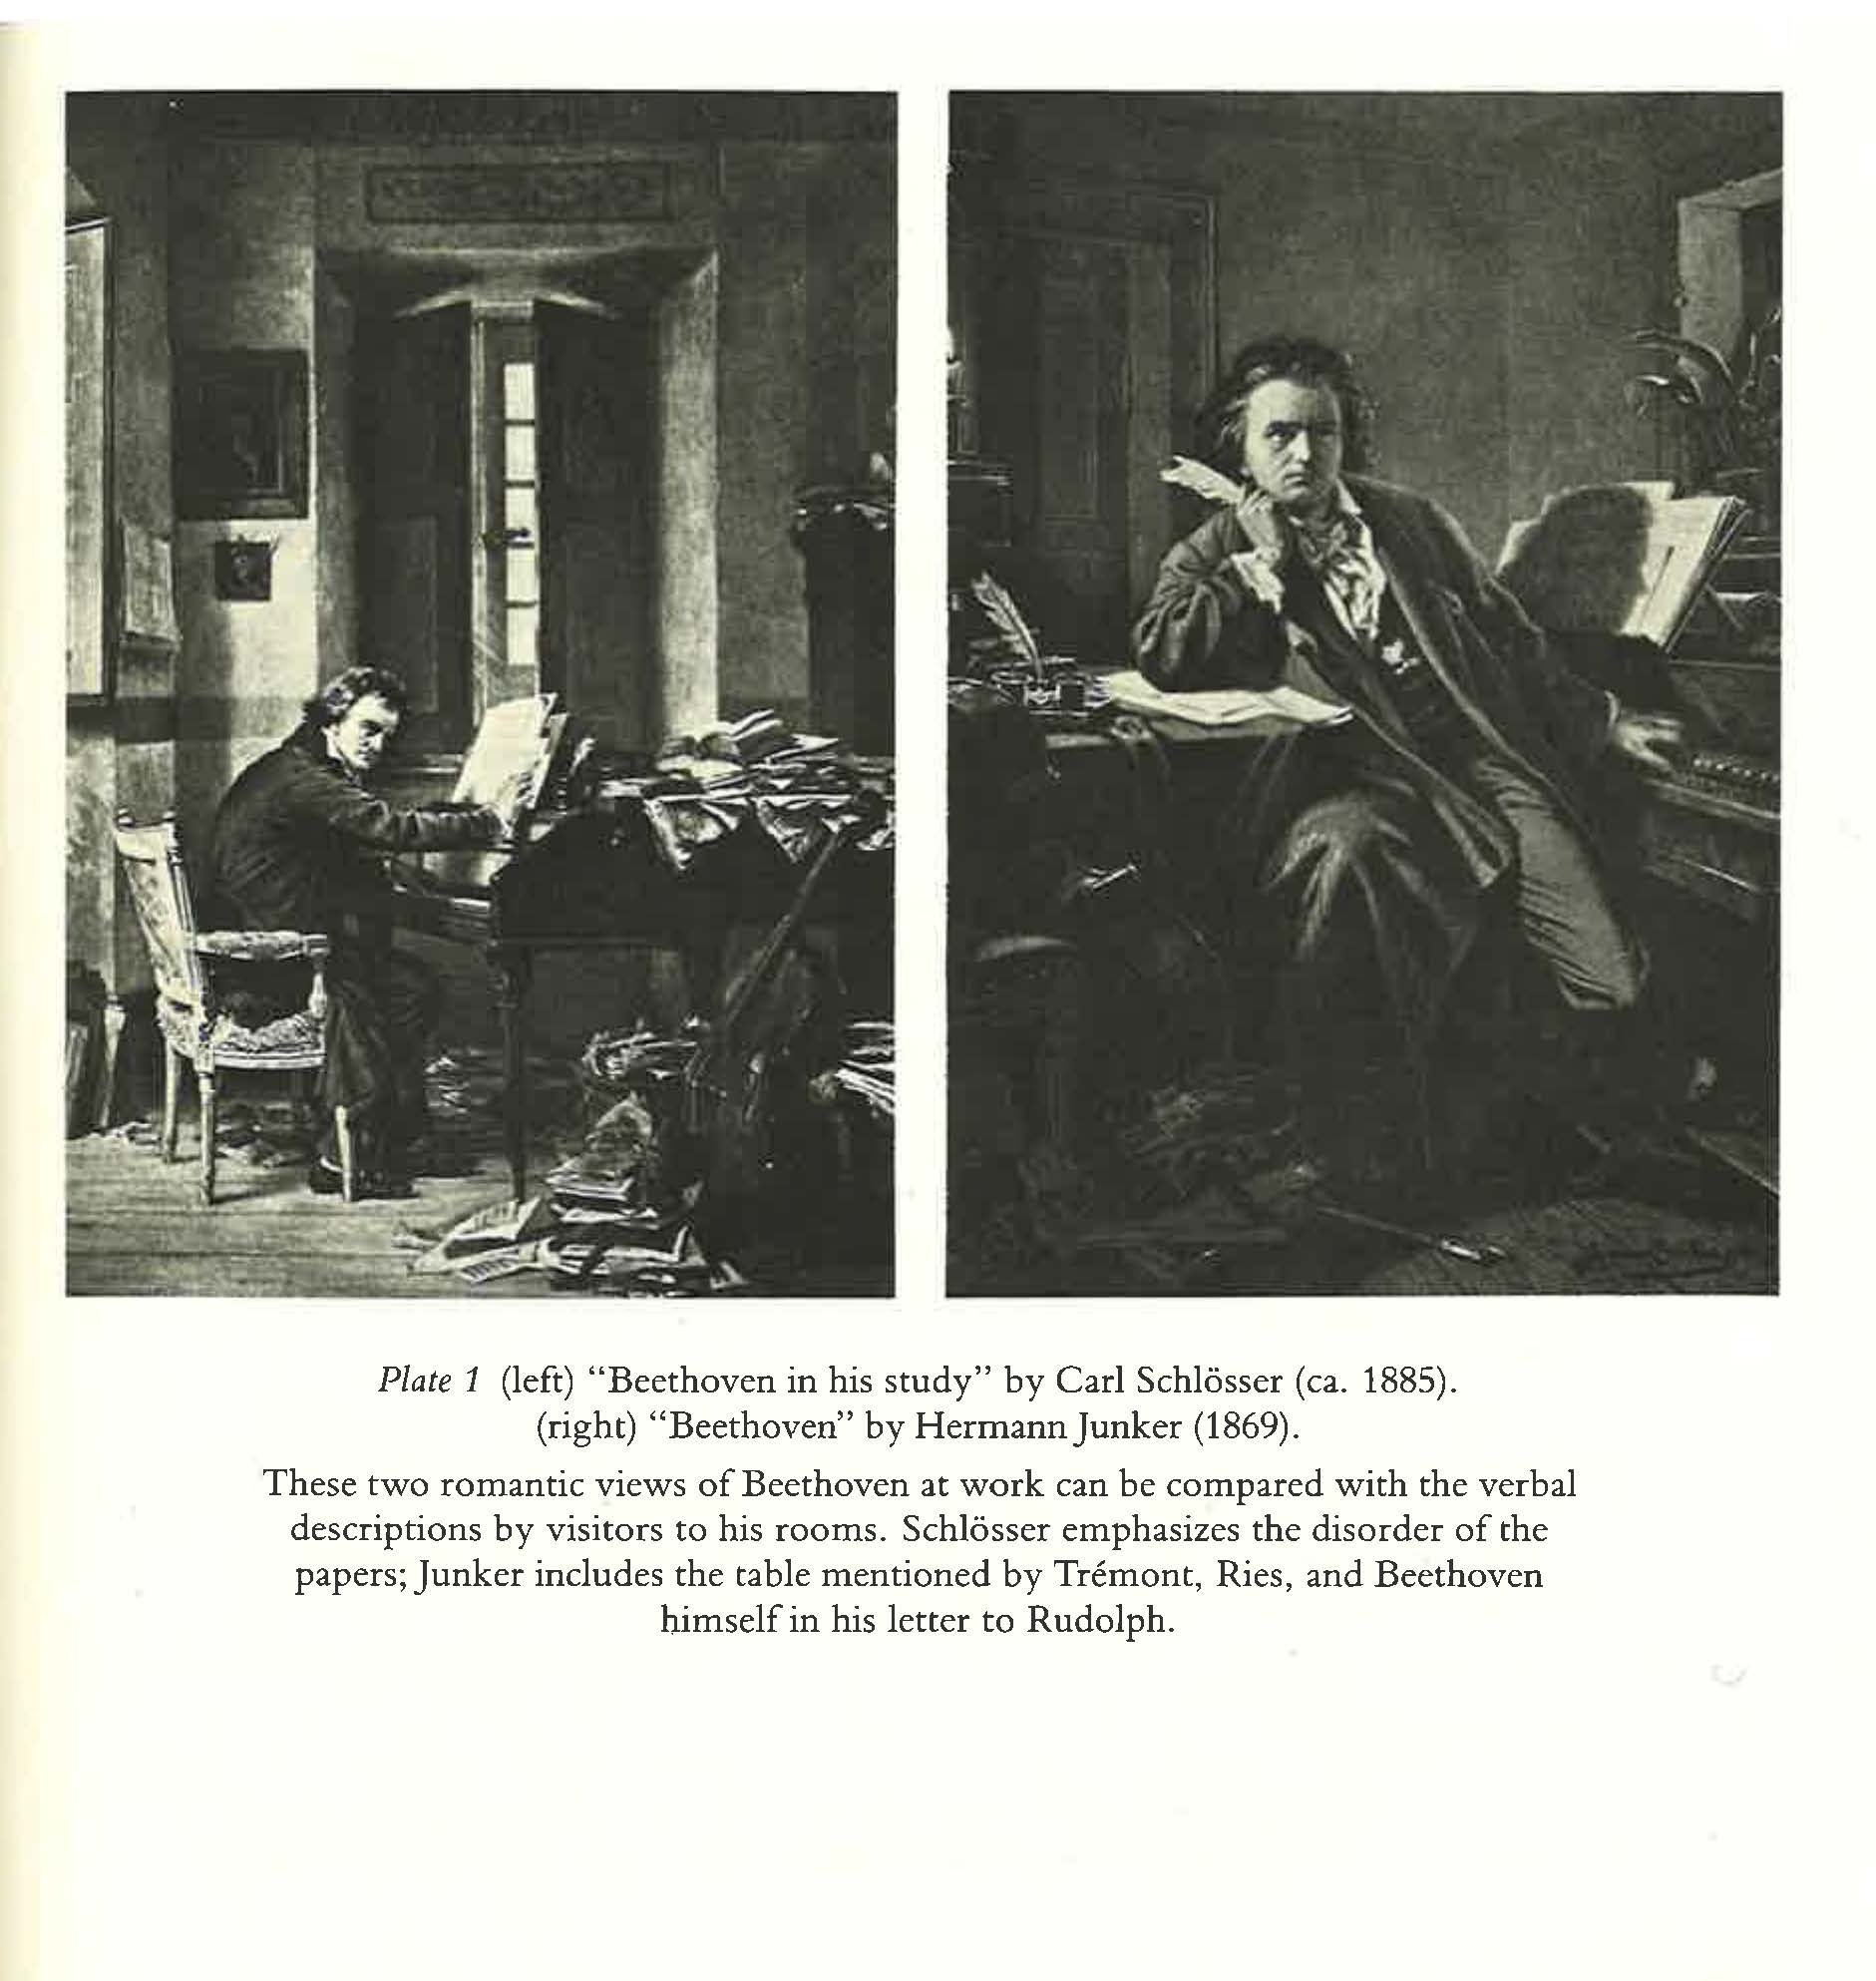 Two black-and-white drawings show a man with wild hair writing music scores with a quill, at a piano overflowing with papers.